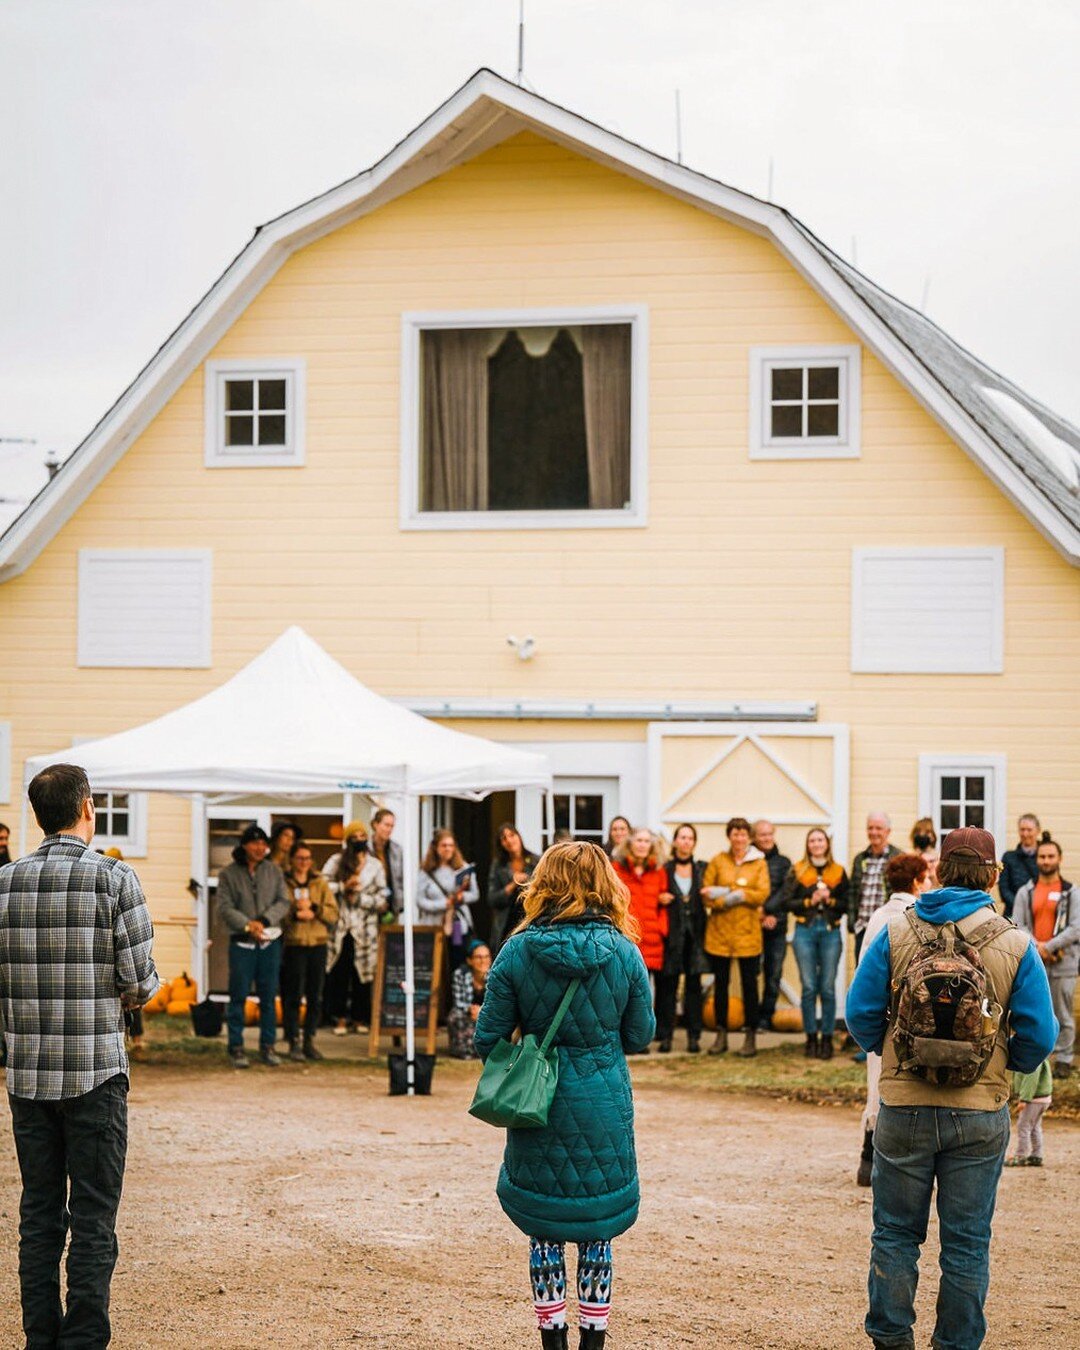 Spring is in full swing on the Front Range! 🌱🌷 Join us this Saturday and Sunday (April 15-16) for our first major celebration of the year: The Spring Birth Summit from @thresholdco.co 🐣 This year&rsquo;s themes are Birth, Rebirth, and Revolution. 